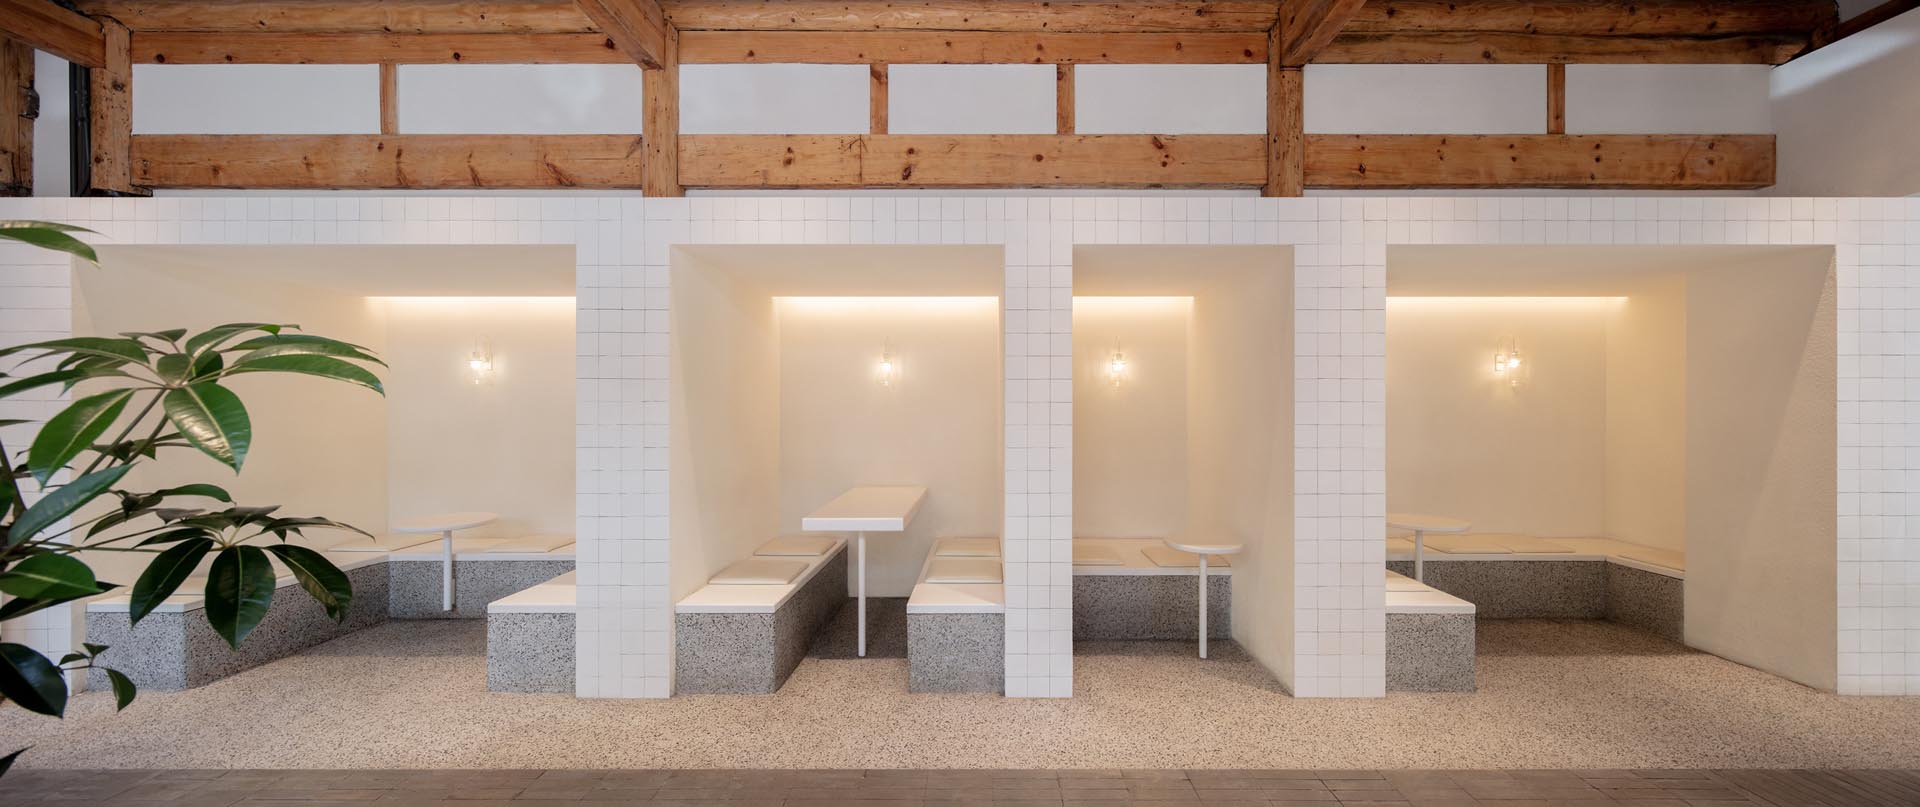 White tiles have been used to create a clean and minimalist look for the seating in this modern coffee shop.